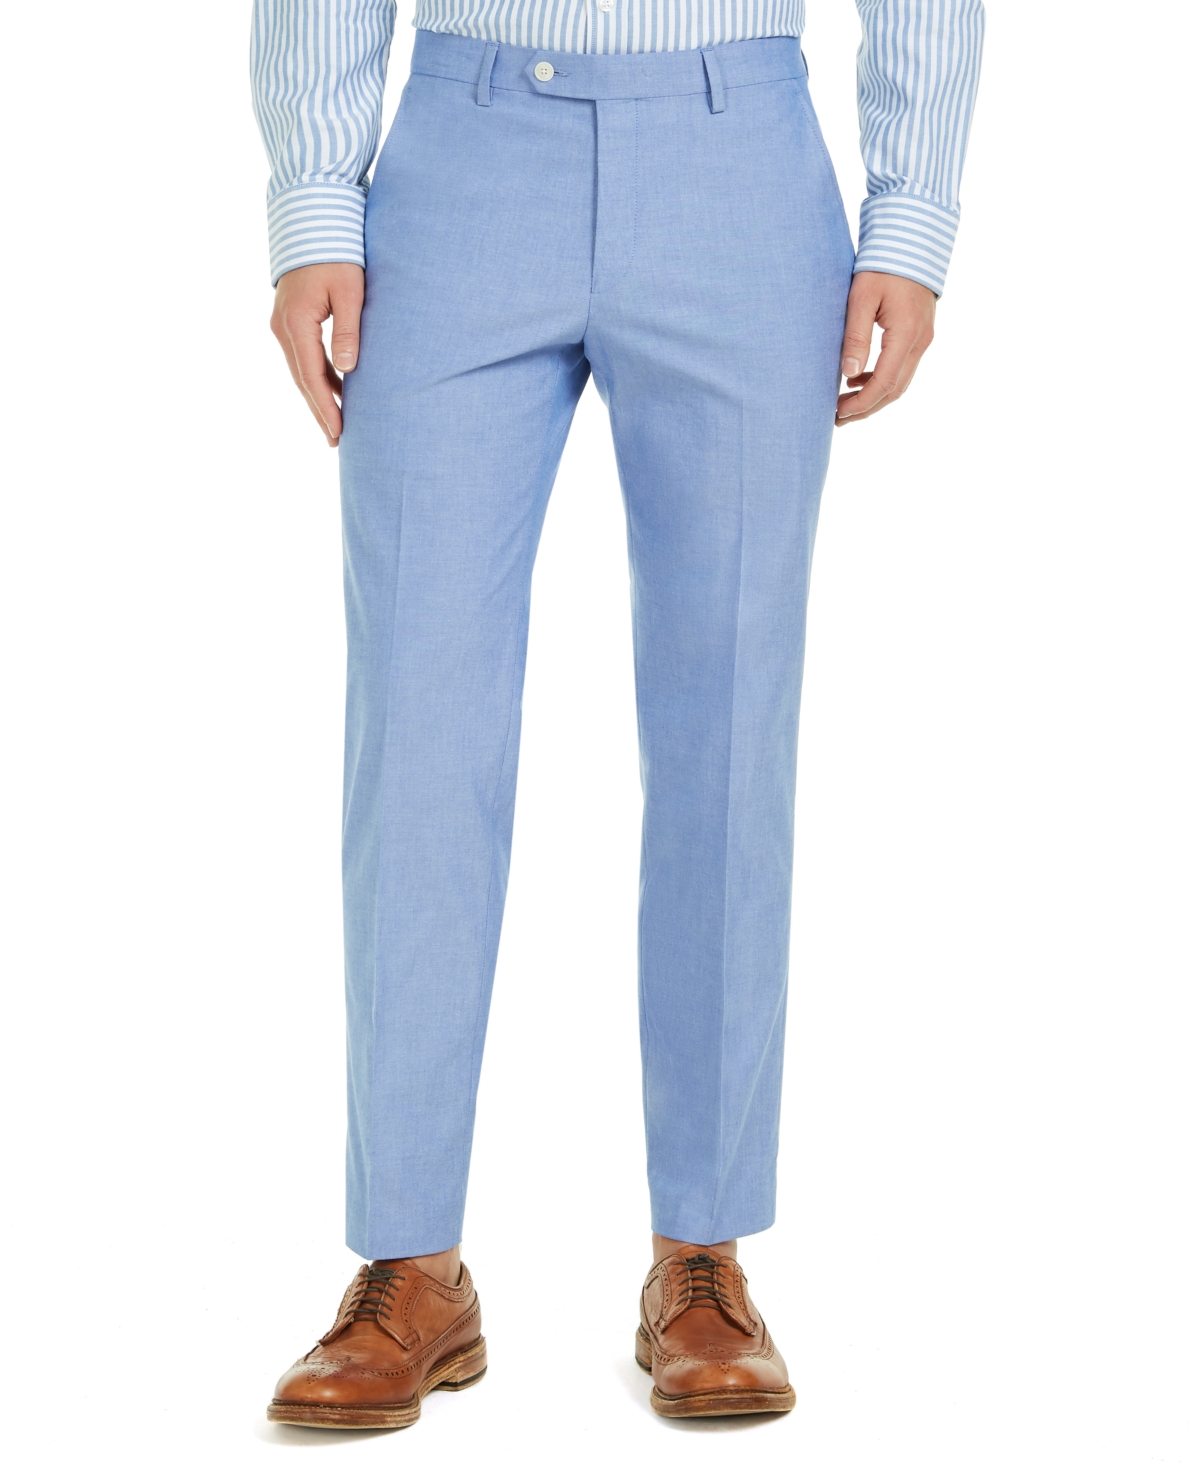 UPC 627729782019 product image for Tommy Hilfiger Men's Modern-Fit Th Flex Stretch Chambray Suit Pants | upcitemdb.com